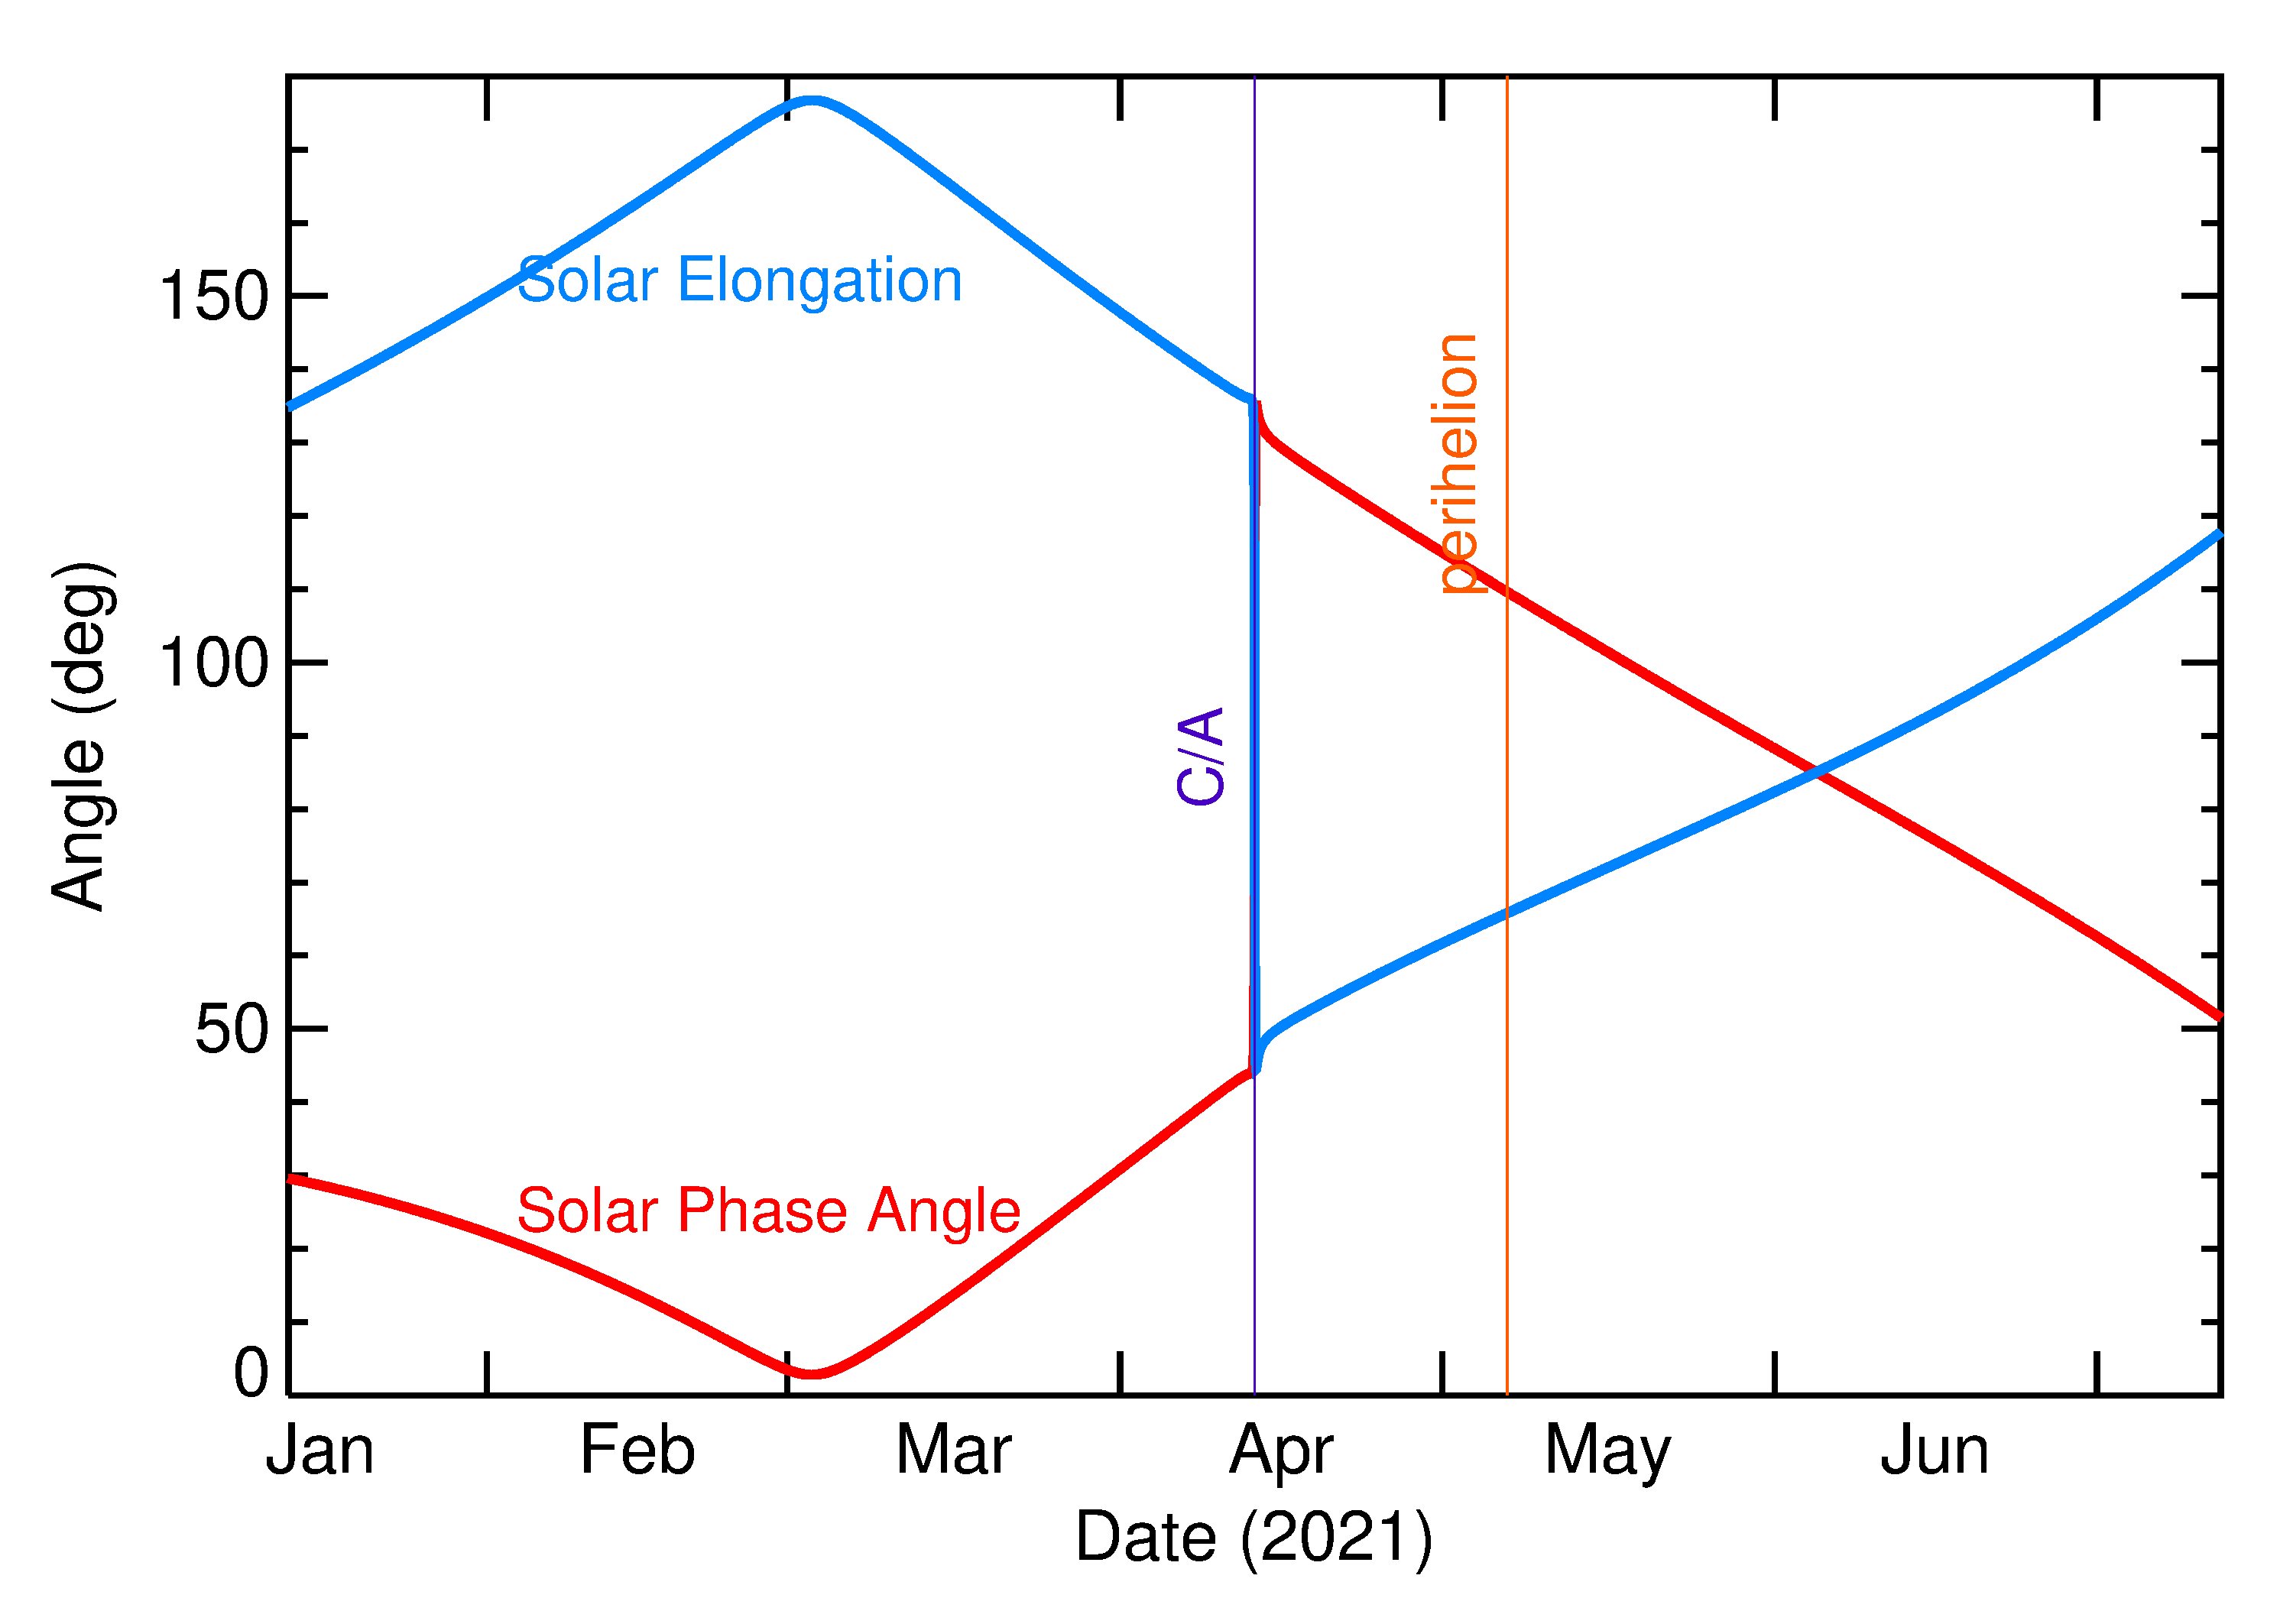 Solar Elongation and Solar Phase Angle of 2021 GW4 in the months around closest approach